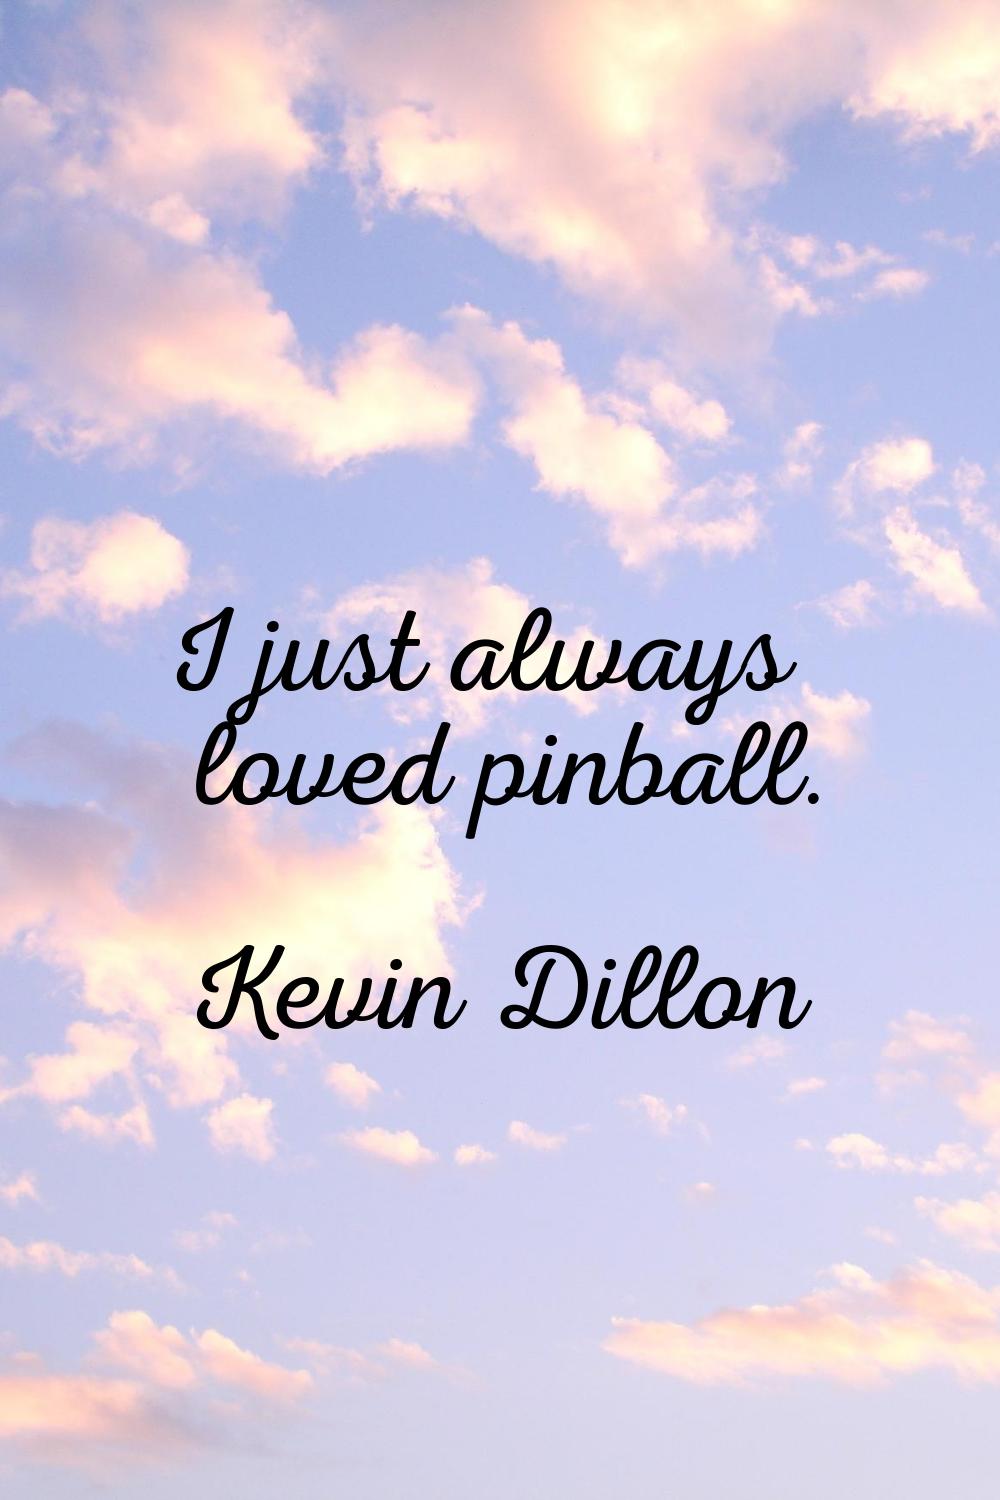 I just always loved pinball.